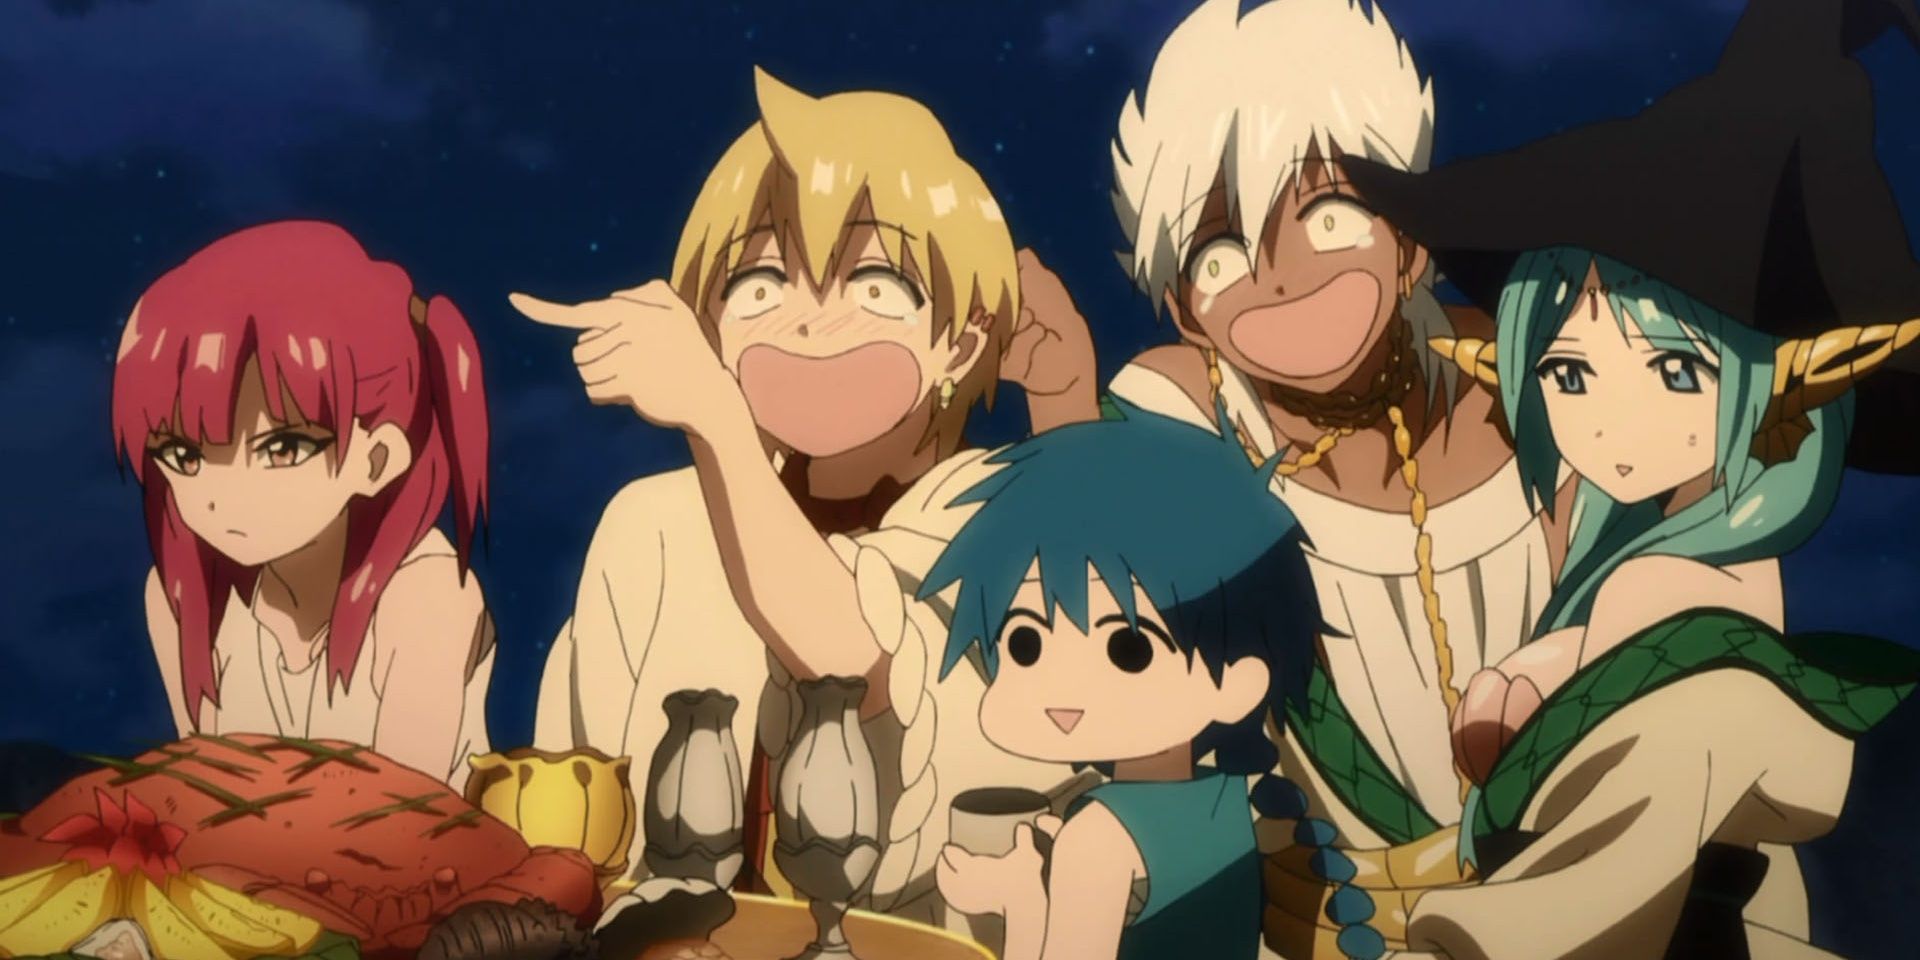 Aladdin and other characters from Magi: Labyrinth of Magic)